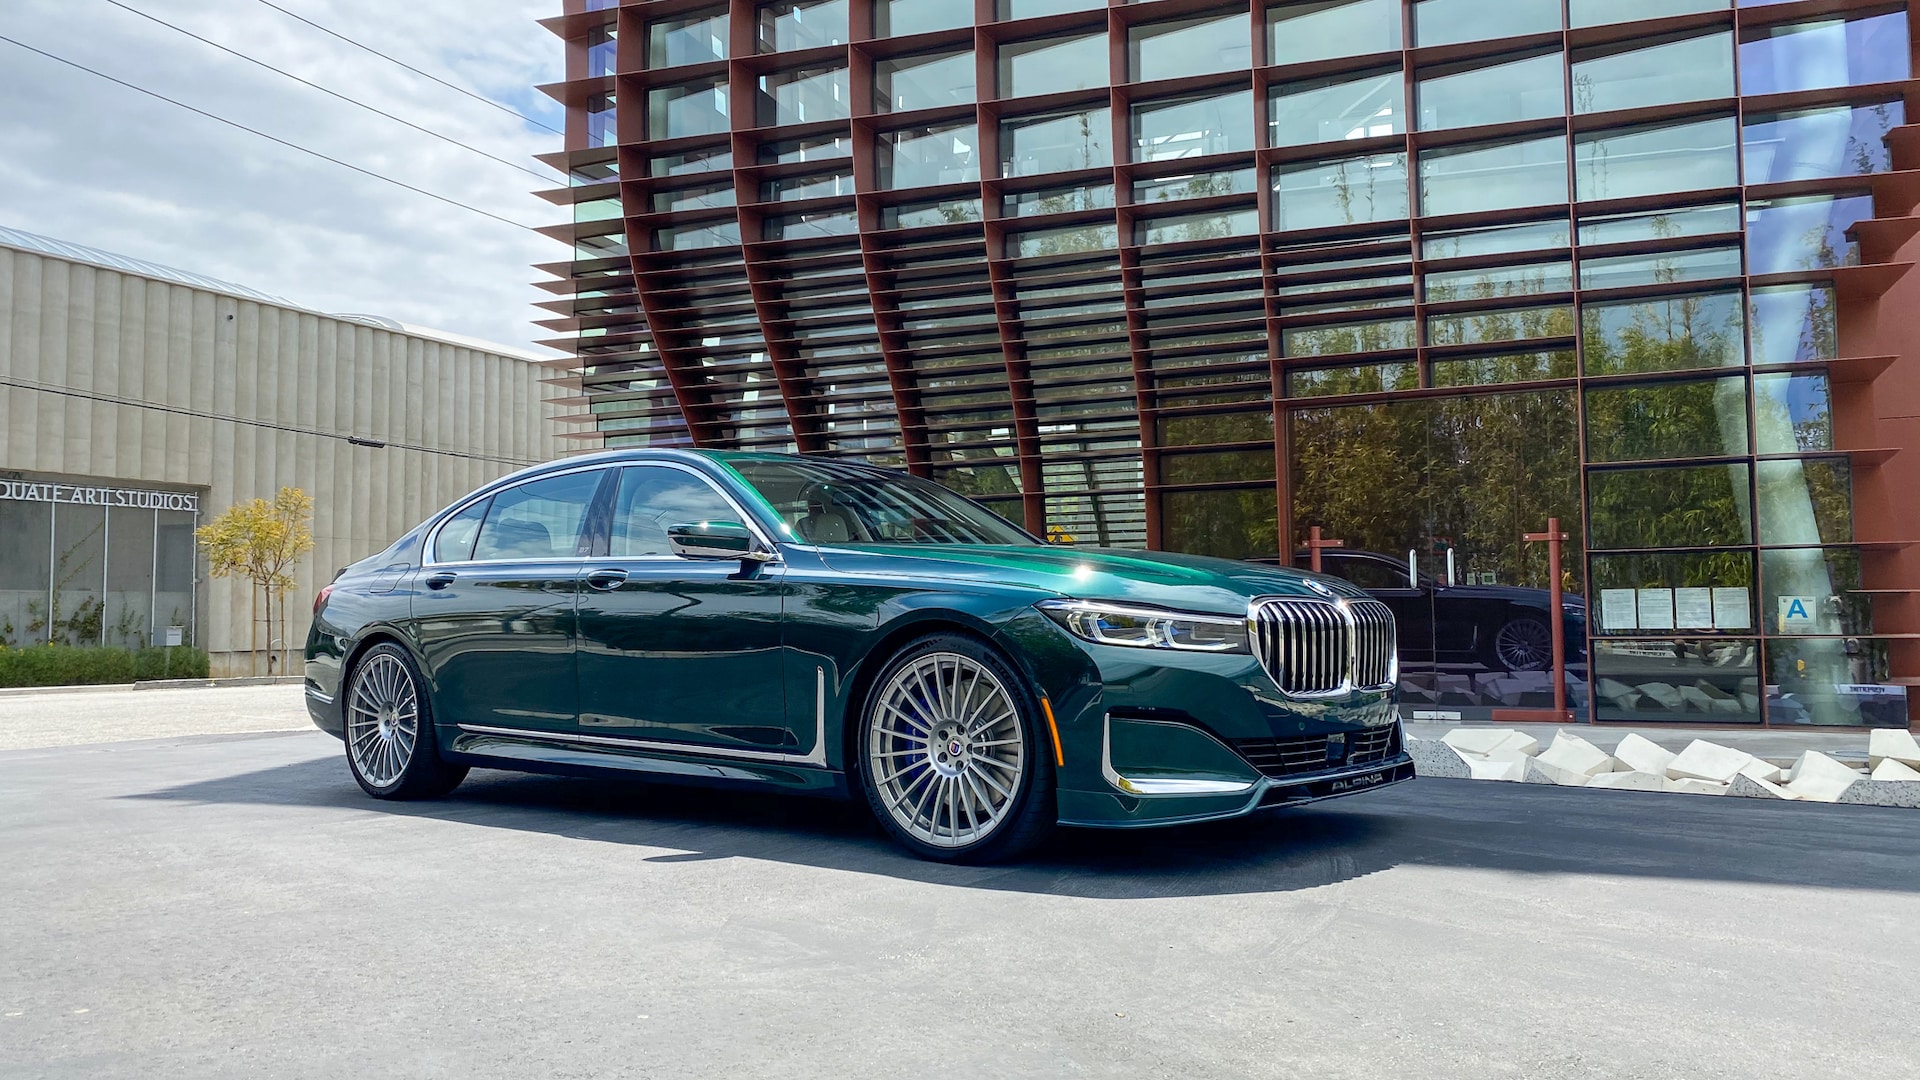 Test Drive: 2020 BMW Alpina B7 xDrive Delivers Luxury and Fun—But You'll Pay